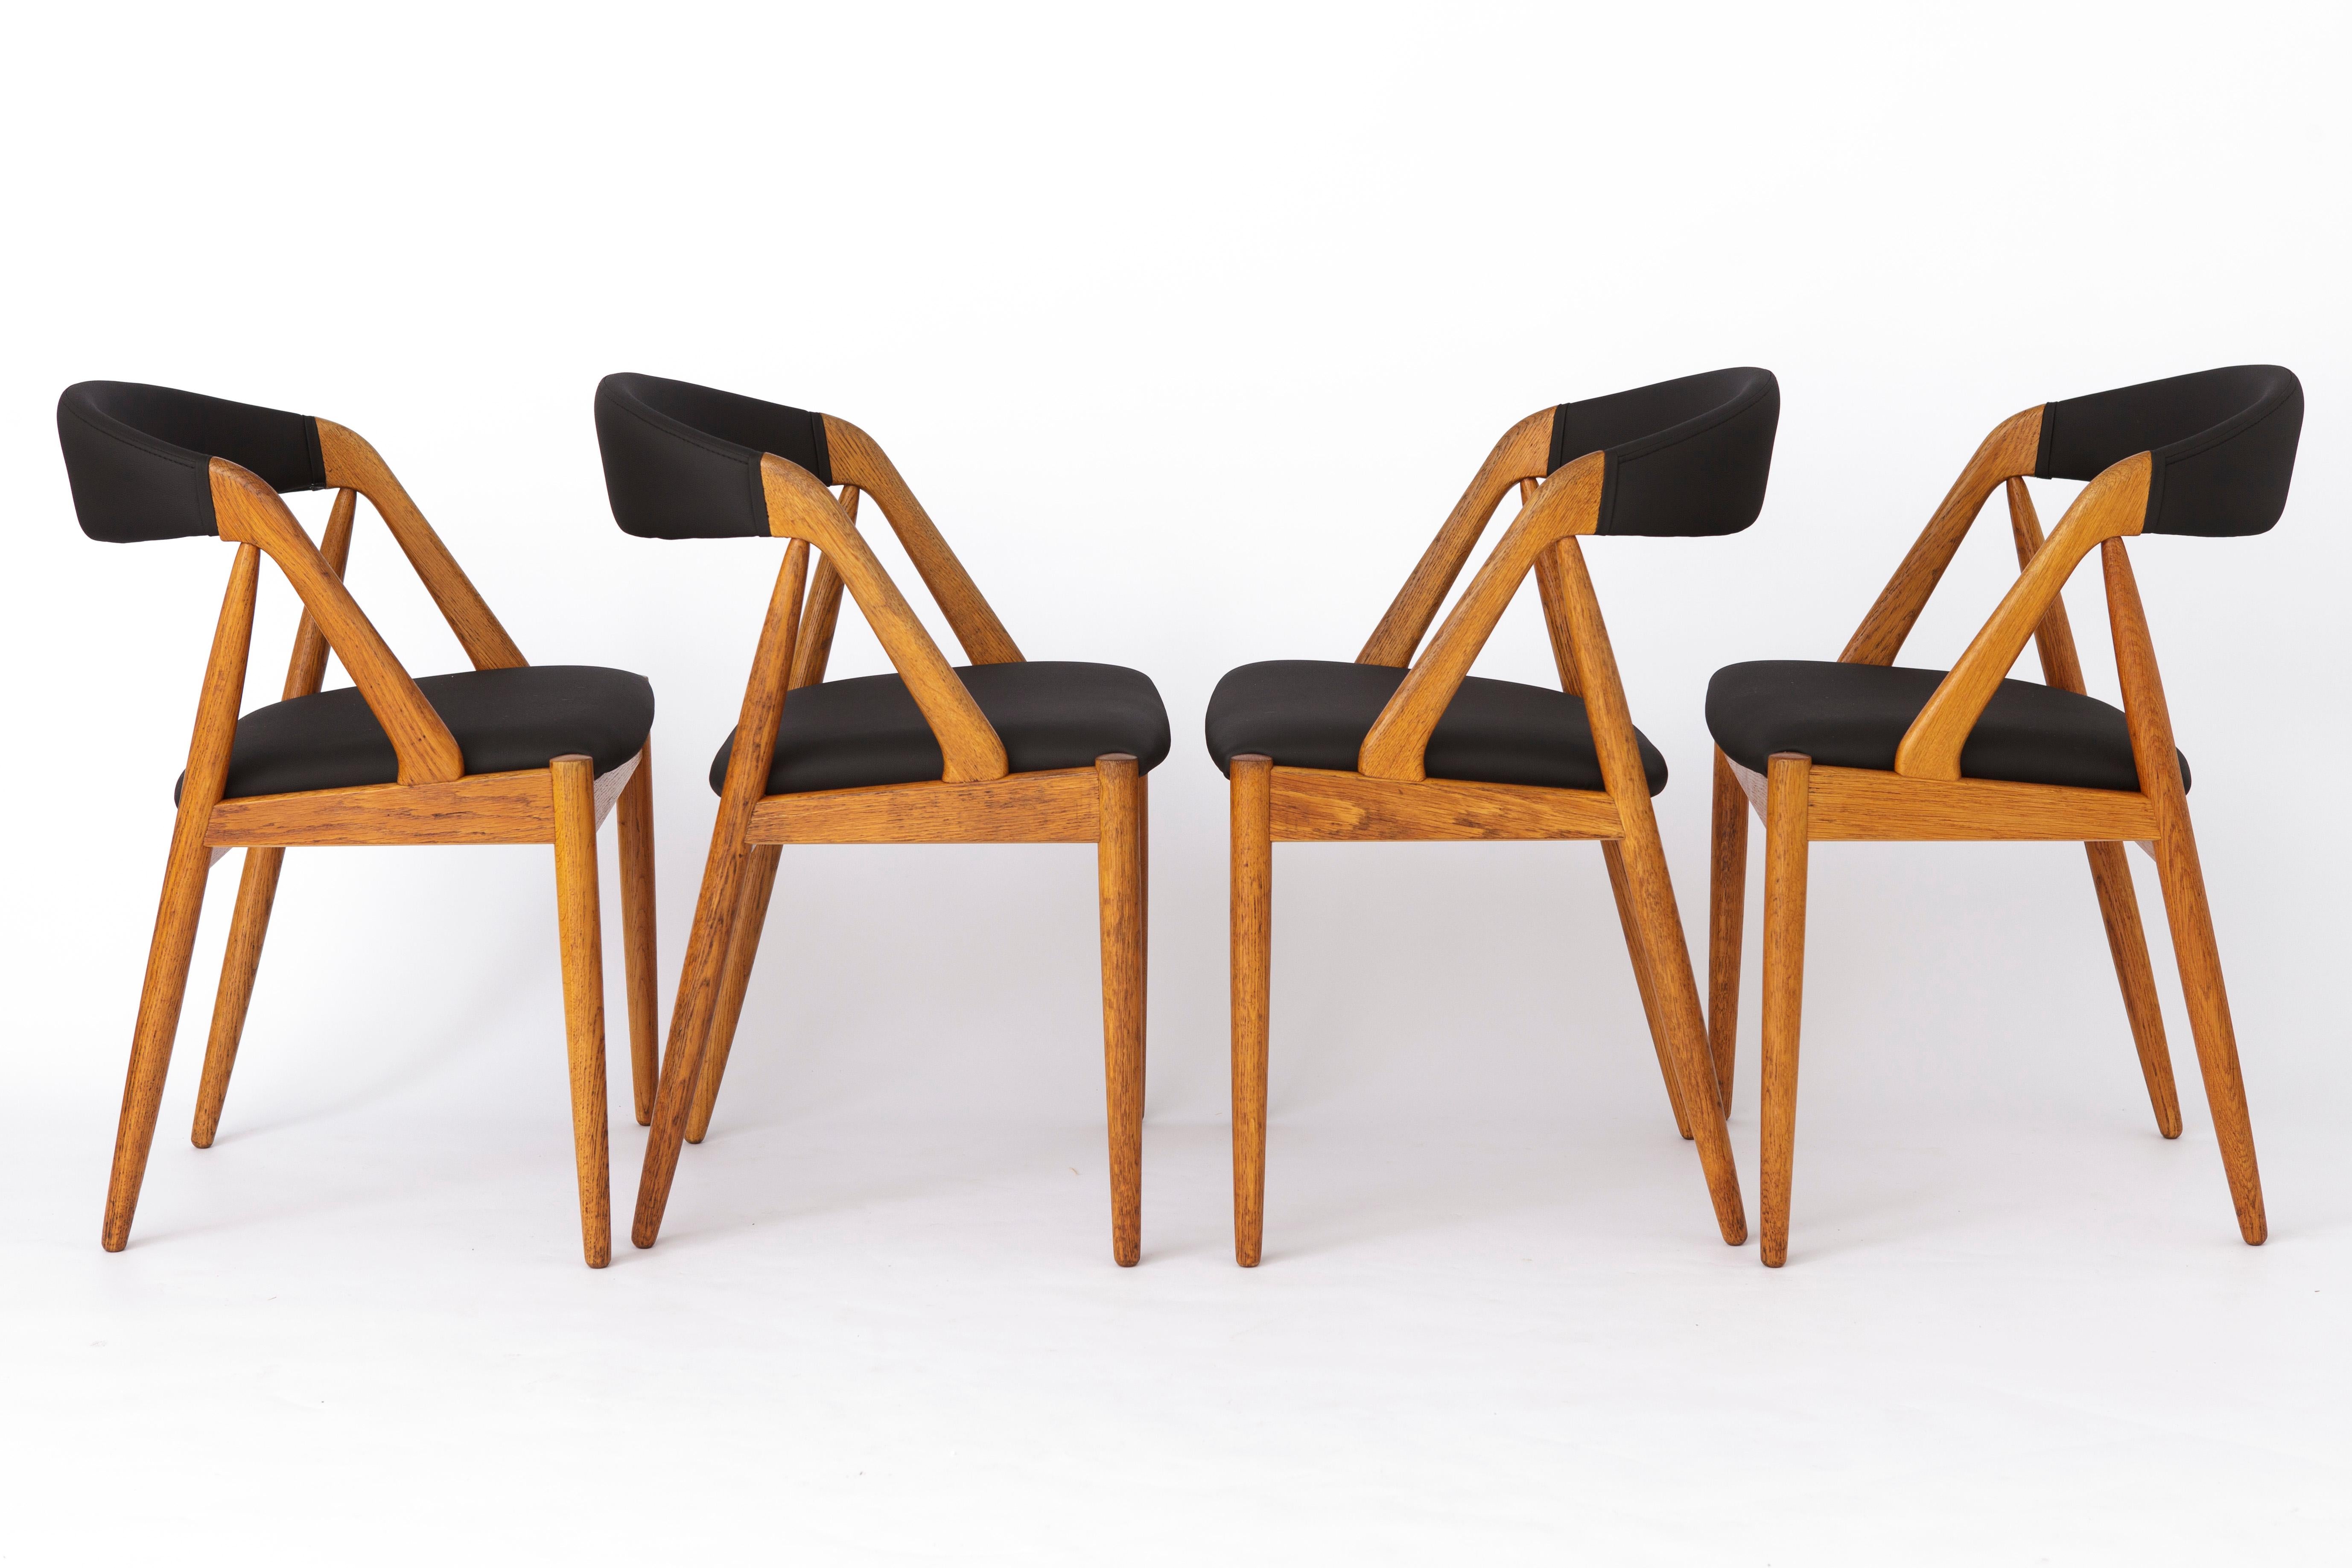 Set of 4 Vintage Chairs designed by Kai Kristiansen.
Model: 31 from the 1960s. 
Displayed price is for a set of 4. 

Very good vintage condition. Sturdy oak chair frames. 
Refurbished and oiled. 
Reupholstered seat and back part with black skai